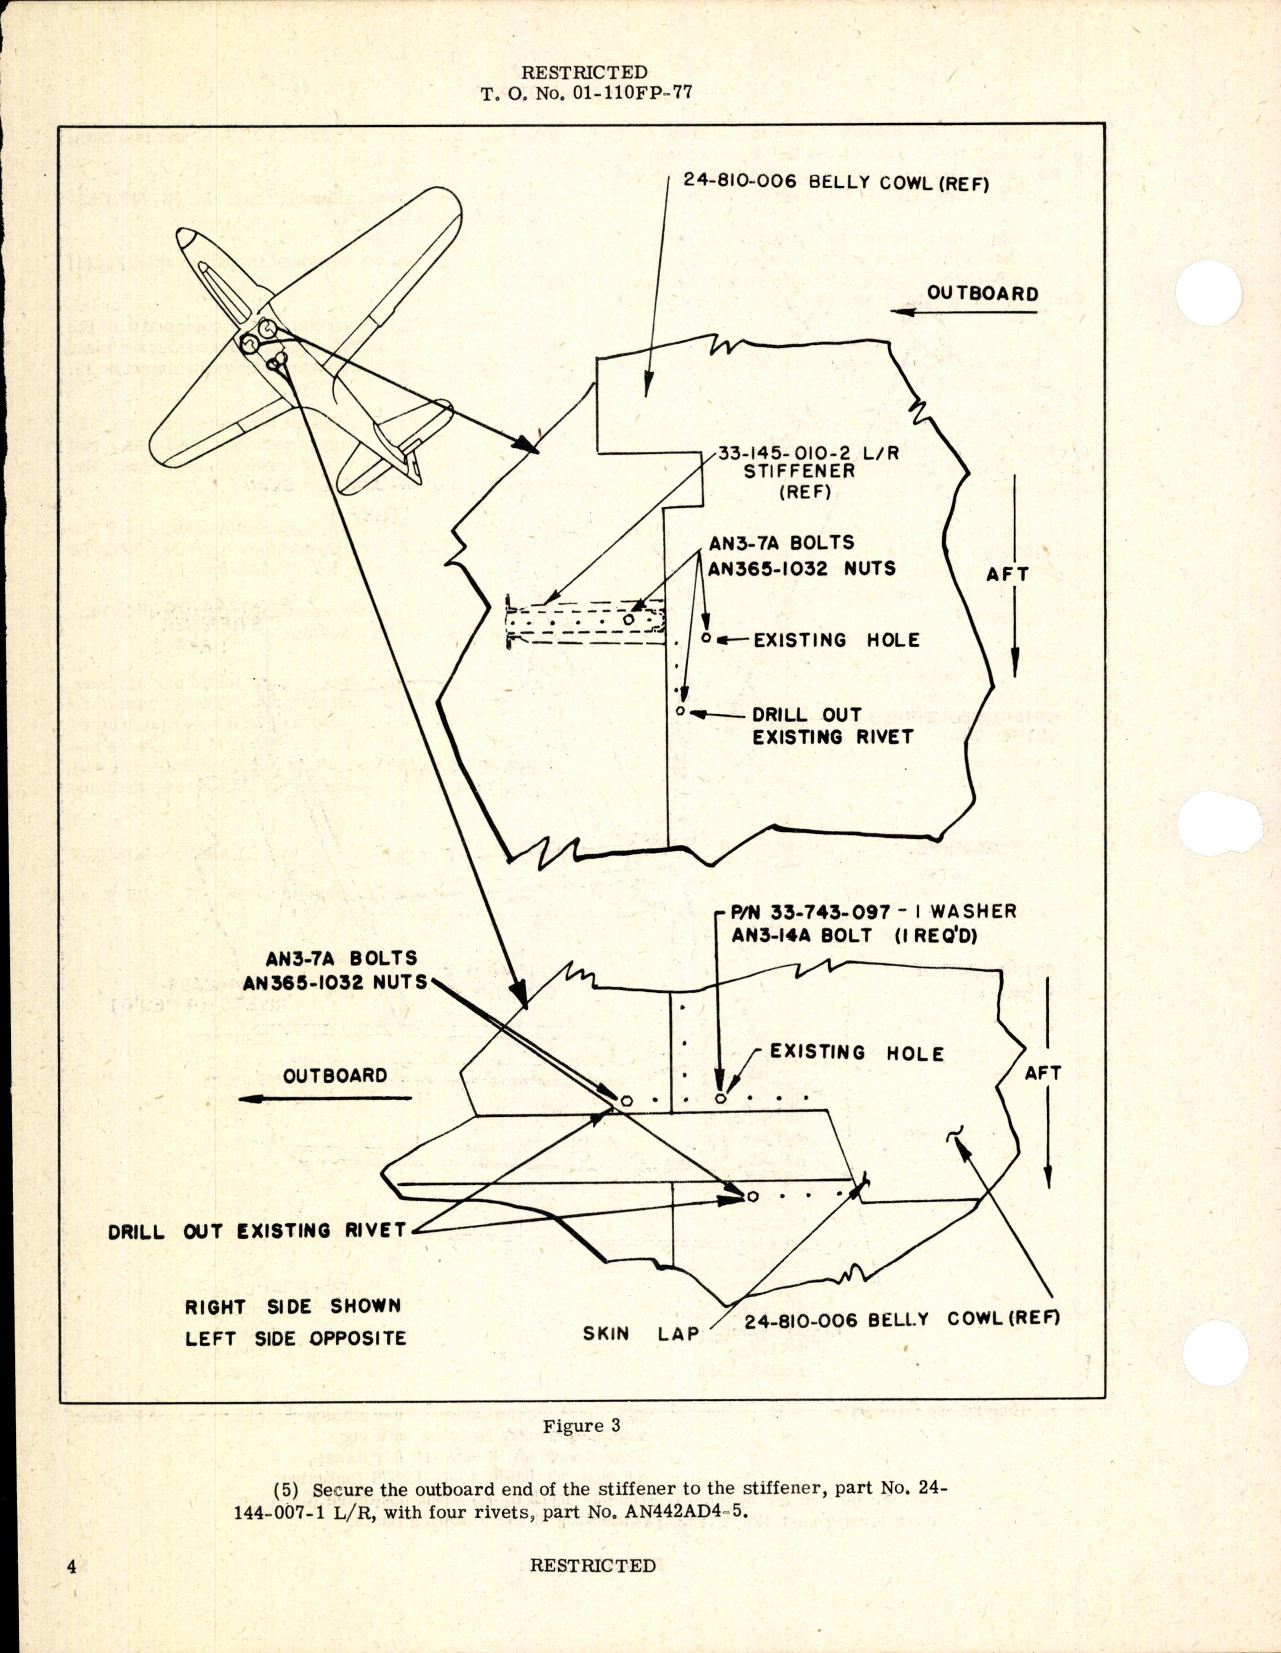 Sample page 4 from AirCorps Library document: Permanent Adjustable Sway Bracing on Wing Center